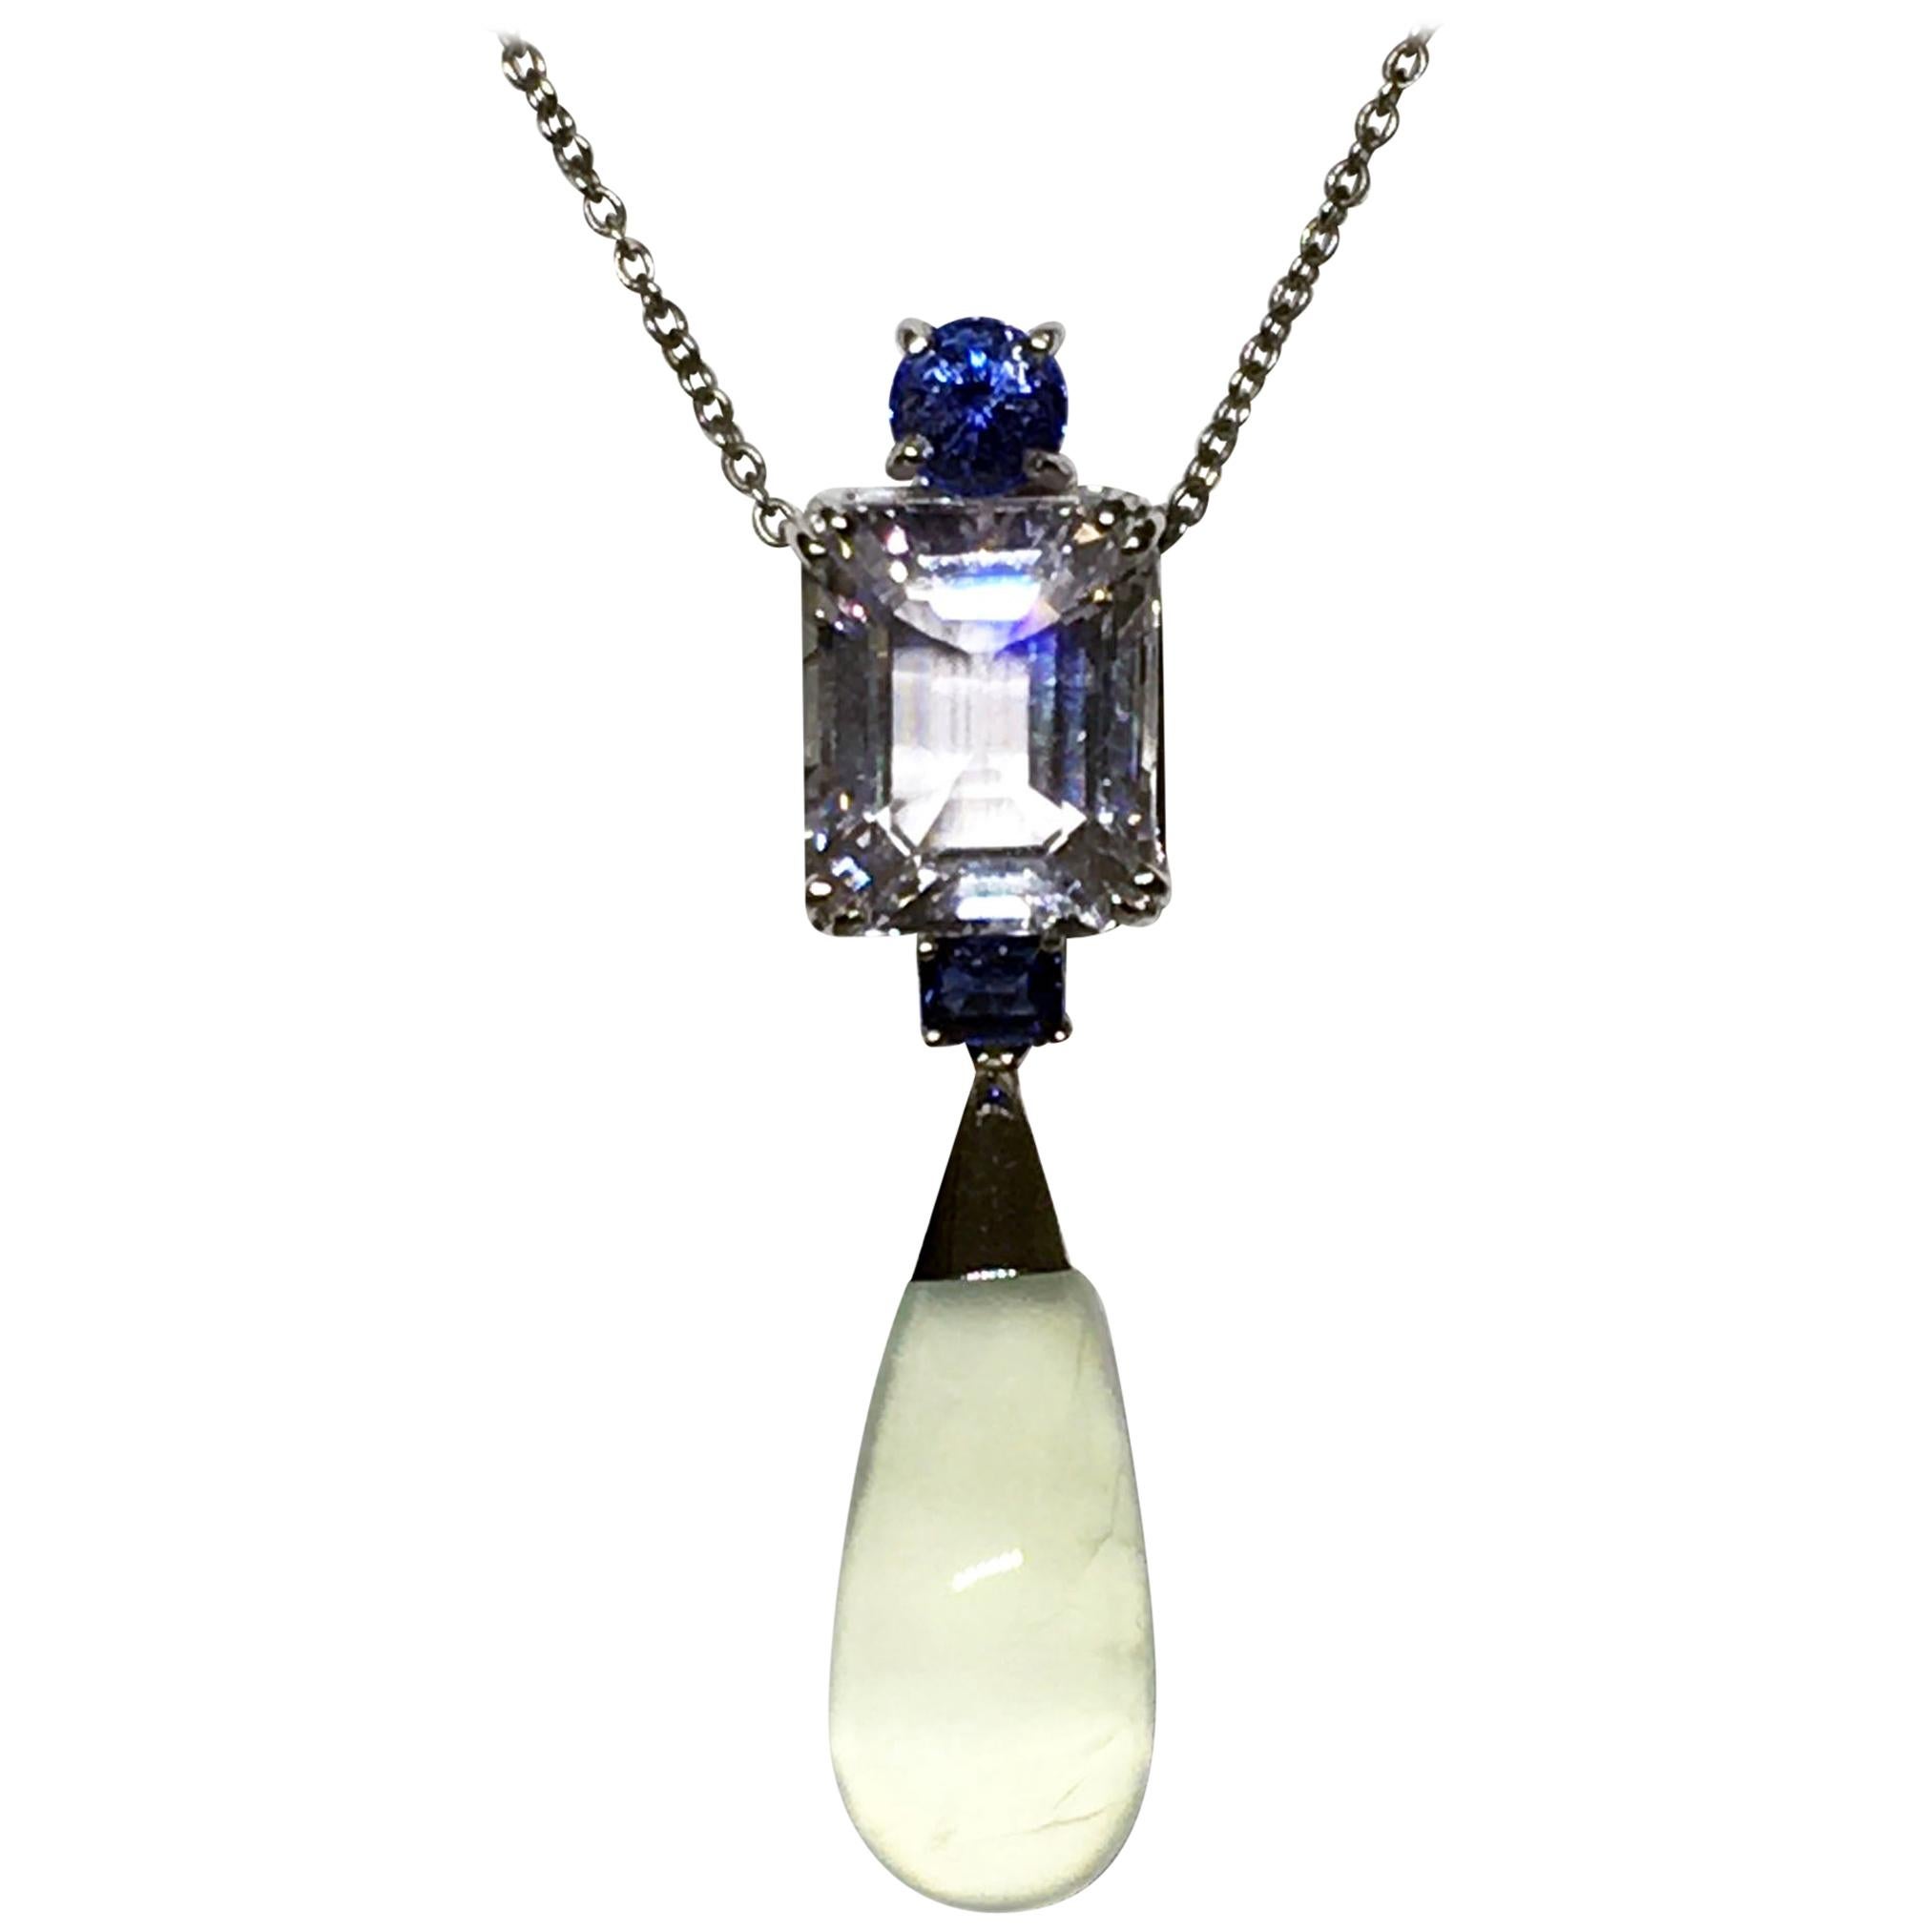 A Morganite, Sapphire and Prehnite Dangle Pendant set in 18kt White Gold. Set with One Small Round Blue Sapphire and a Second Emerald Cut Blue Sapphire Totaling 0.47 Carats. Also Set with an Emerald cut Morganite of 6.7 Carats & a 9.2 Carat Prehnite